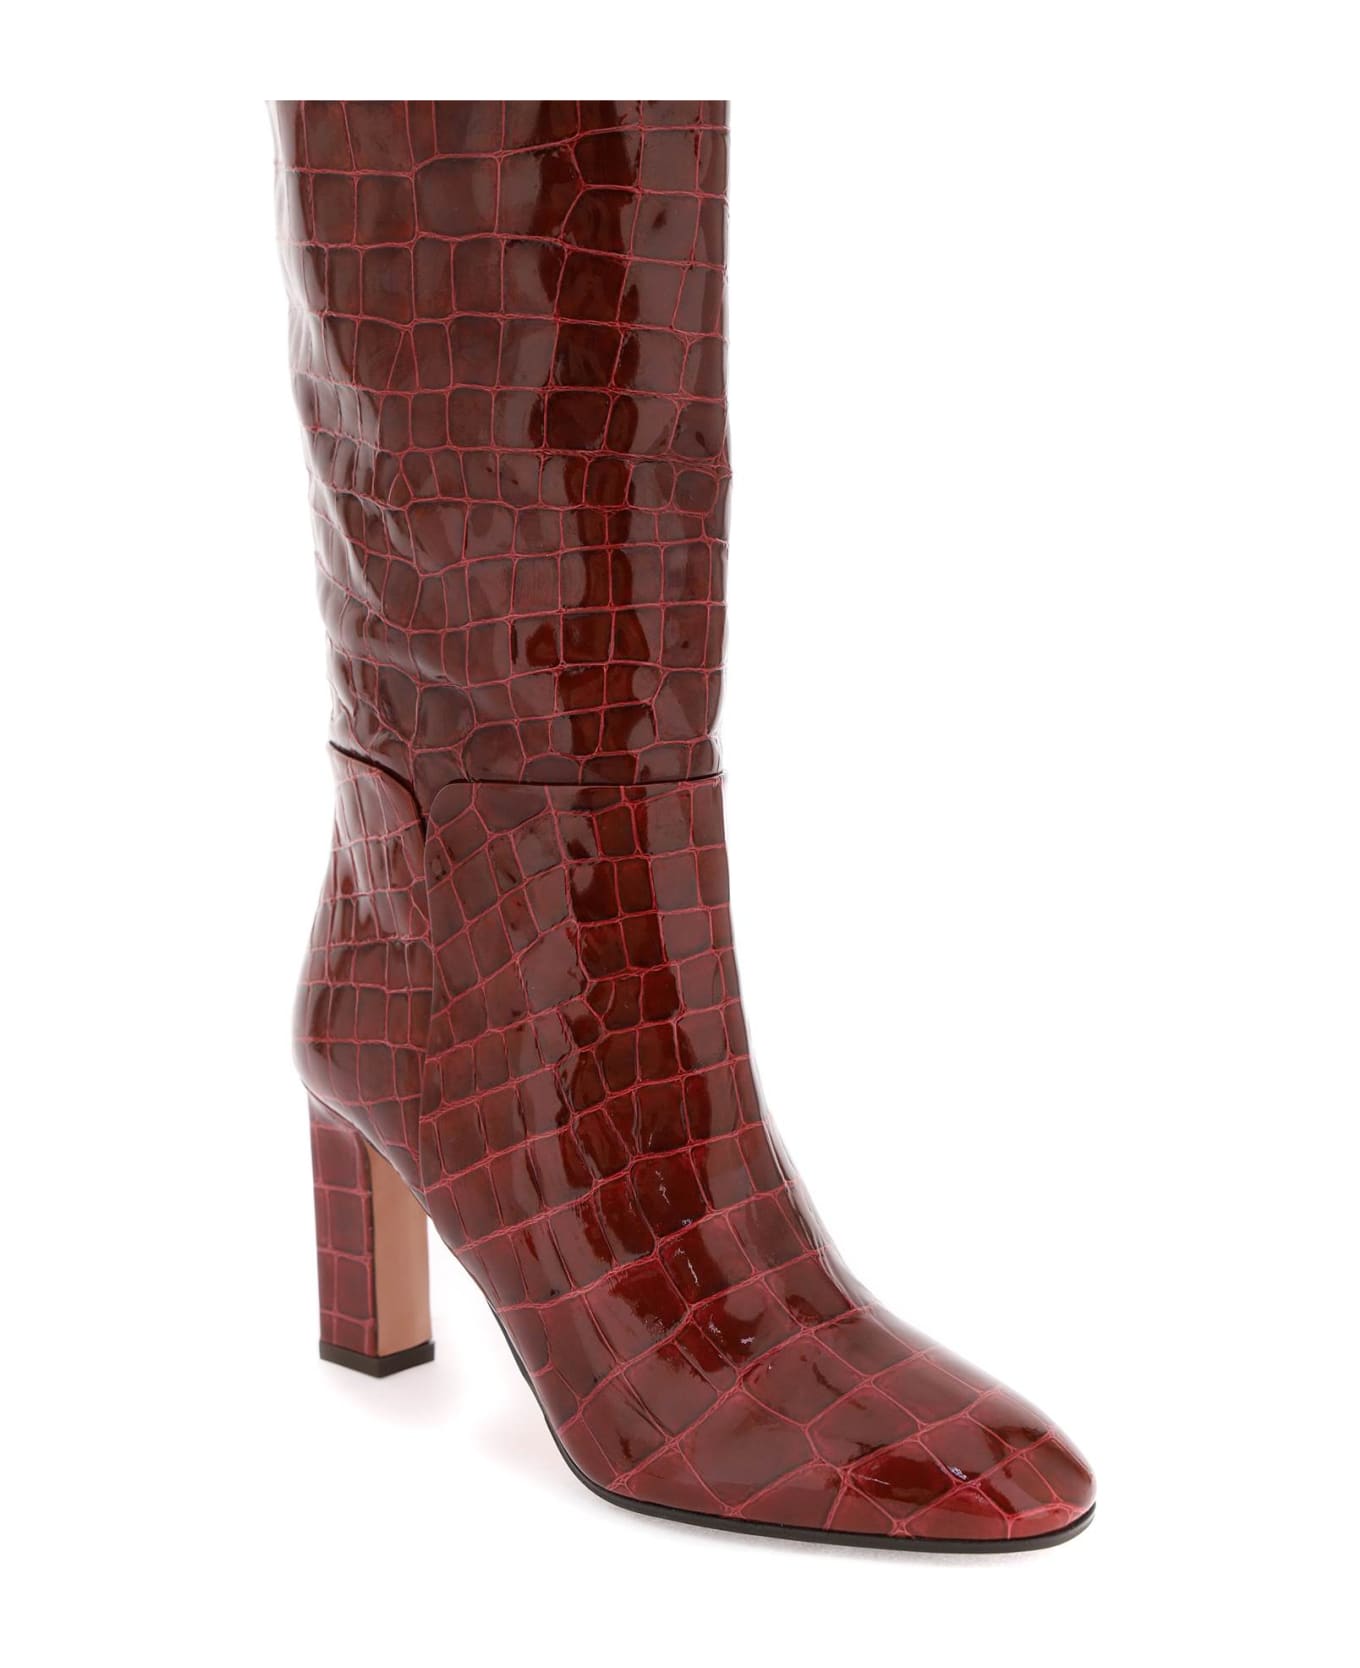 Aquazzura Sellier Boots In Croc-embossed Leather - DARK AUBERGEUR (Red)